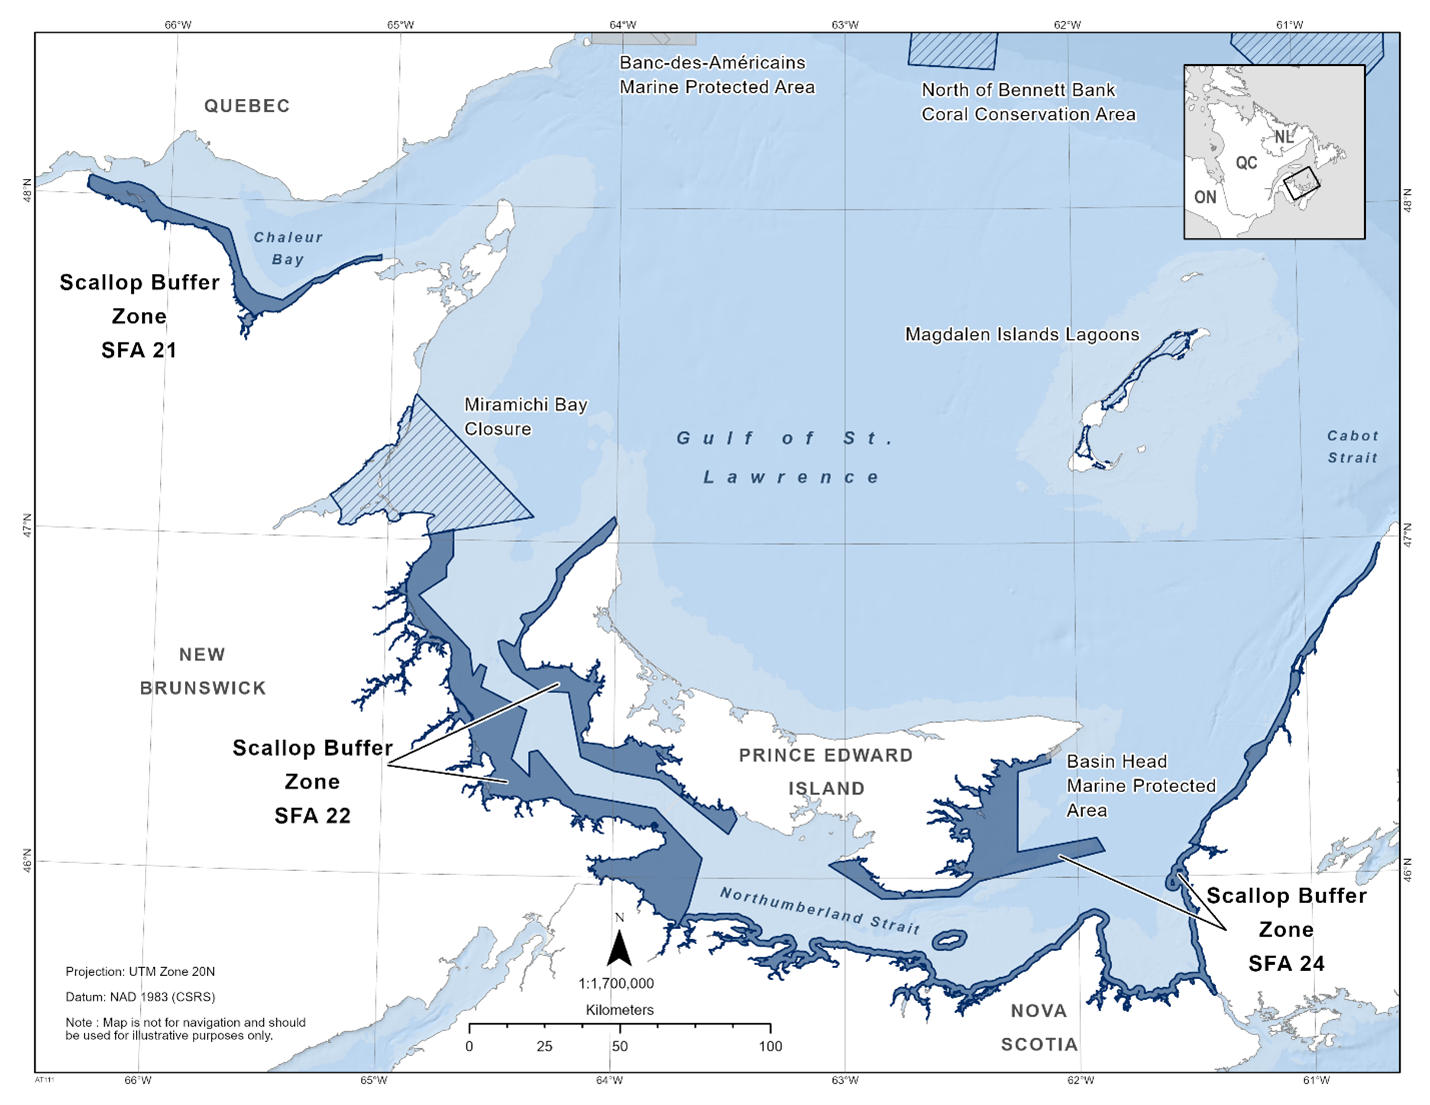 Map of the Scallop Buffer Zone SFA 21, SFA 22, and SFA 24 depicted in dark blue. The map also includes the other marine refuges nearby with dark blue diagonal lines (North of Bennett Bank Coral Conservation Area, Magdalen Islands Lagoons, Miramichi Bay).